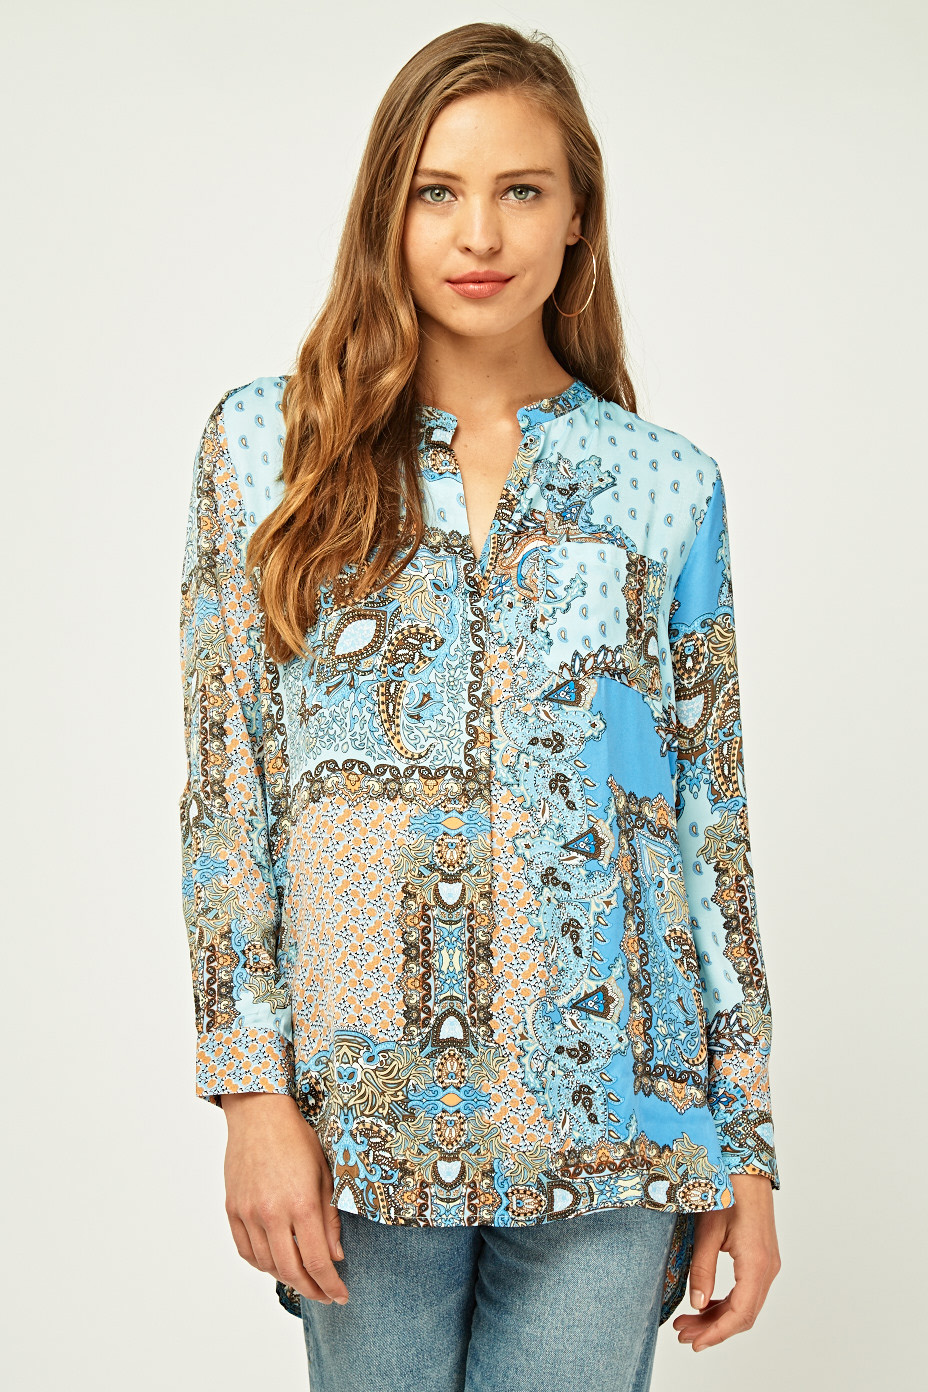 Moroccan Tile Printed Blouse - Just $7